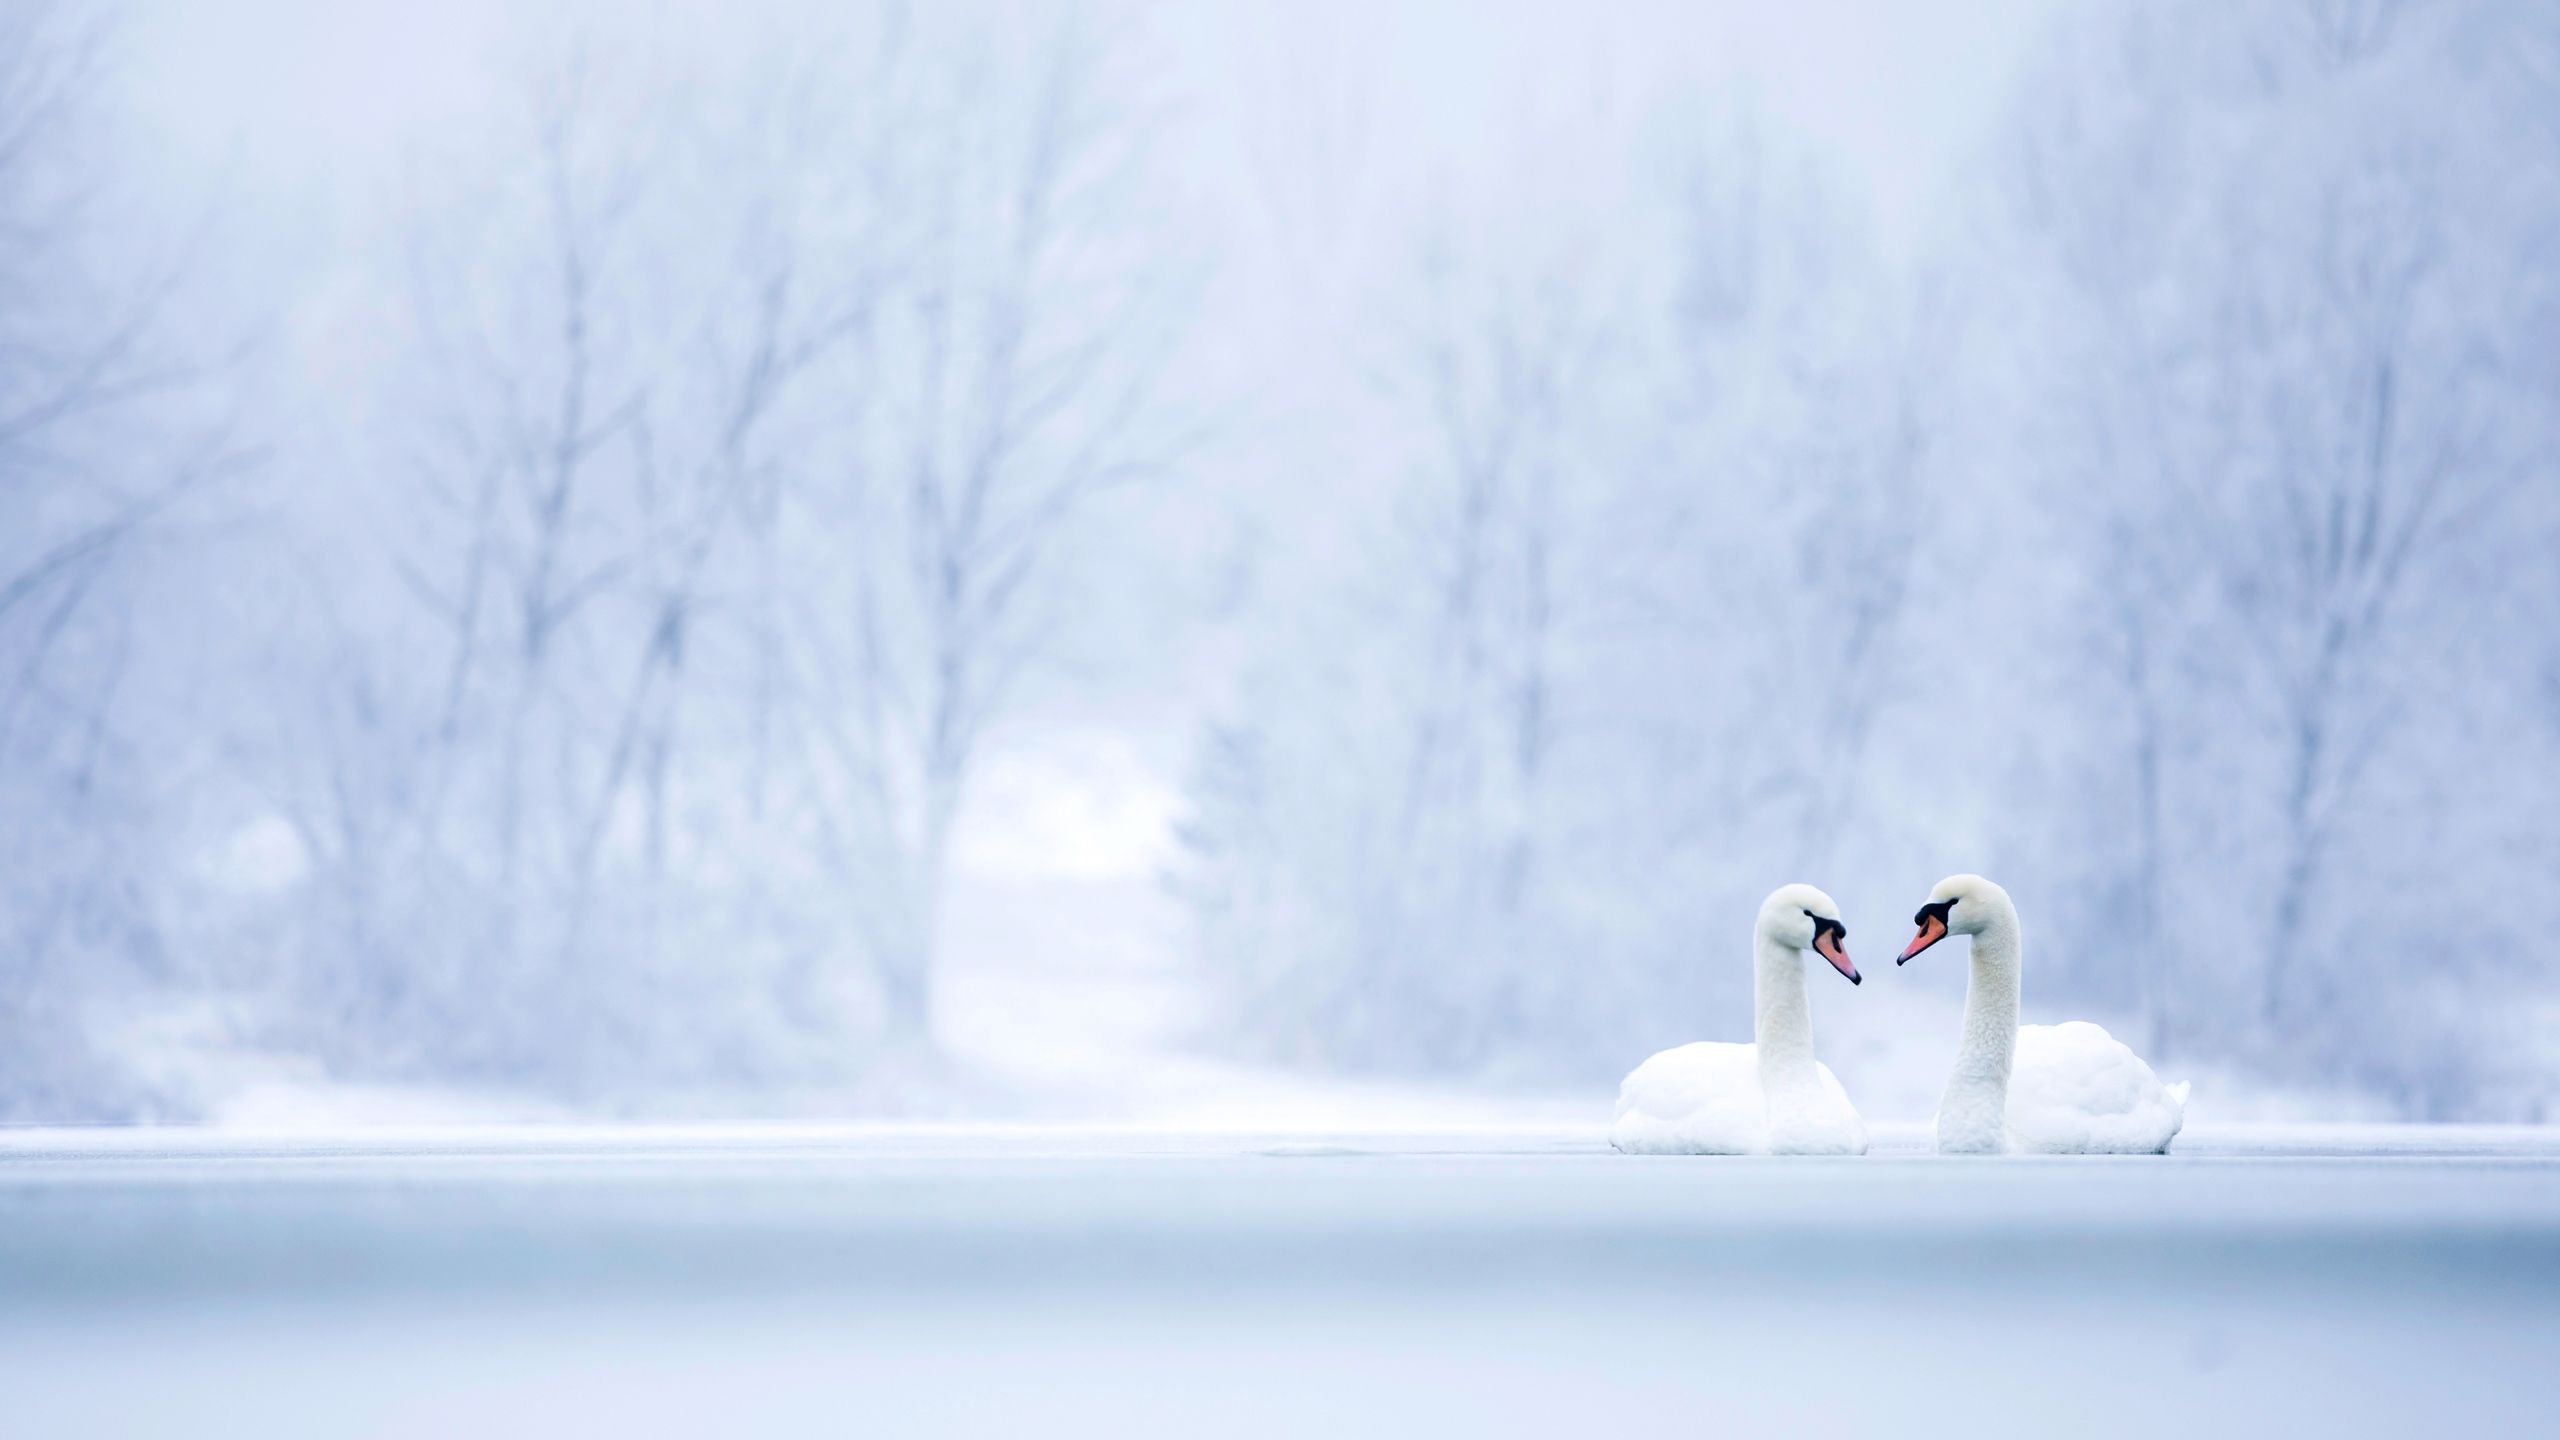 Two mute swans on a lake with a beautiful snowy, winter background